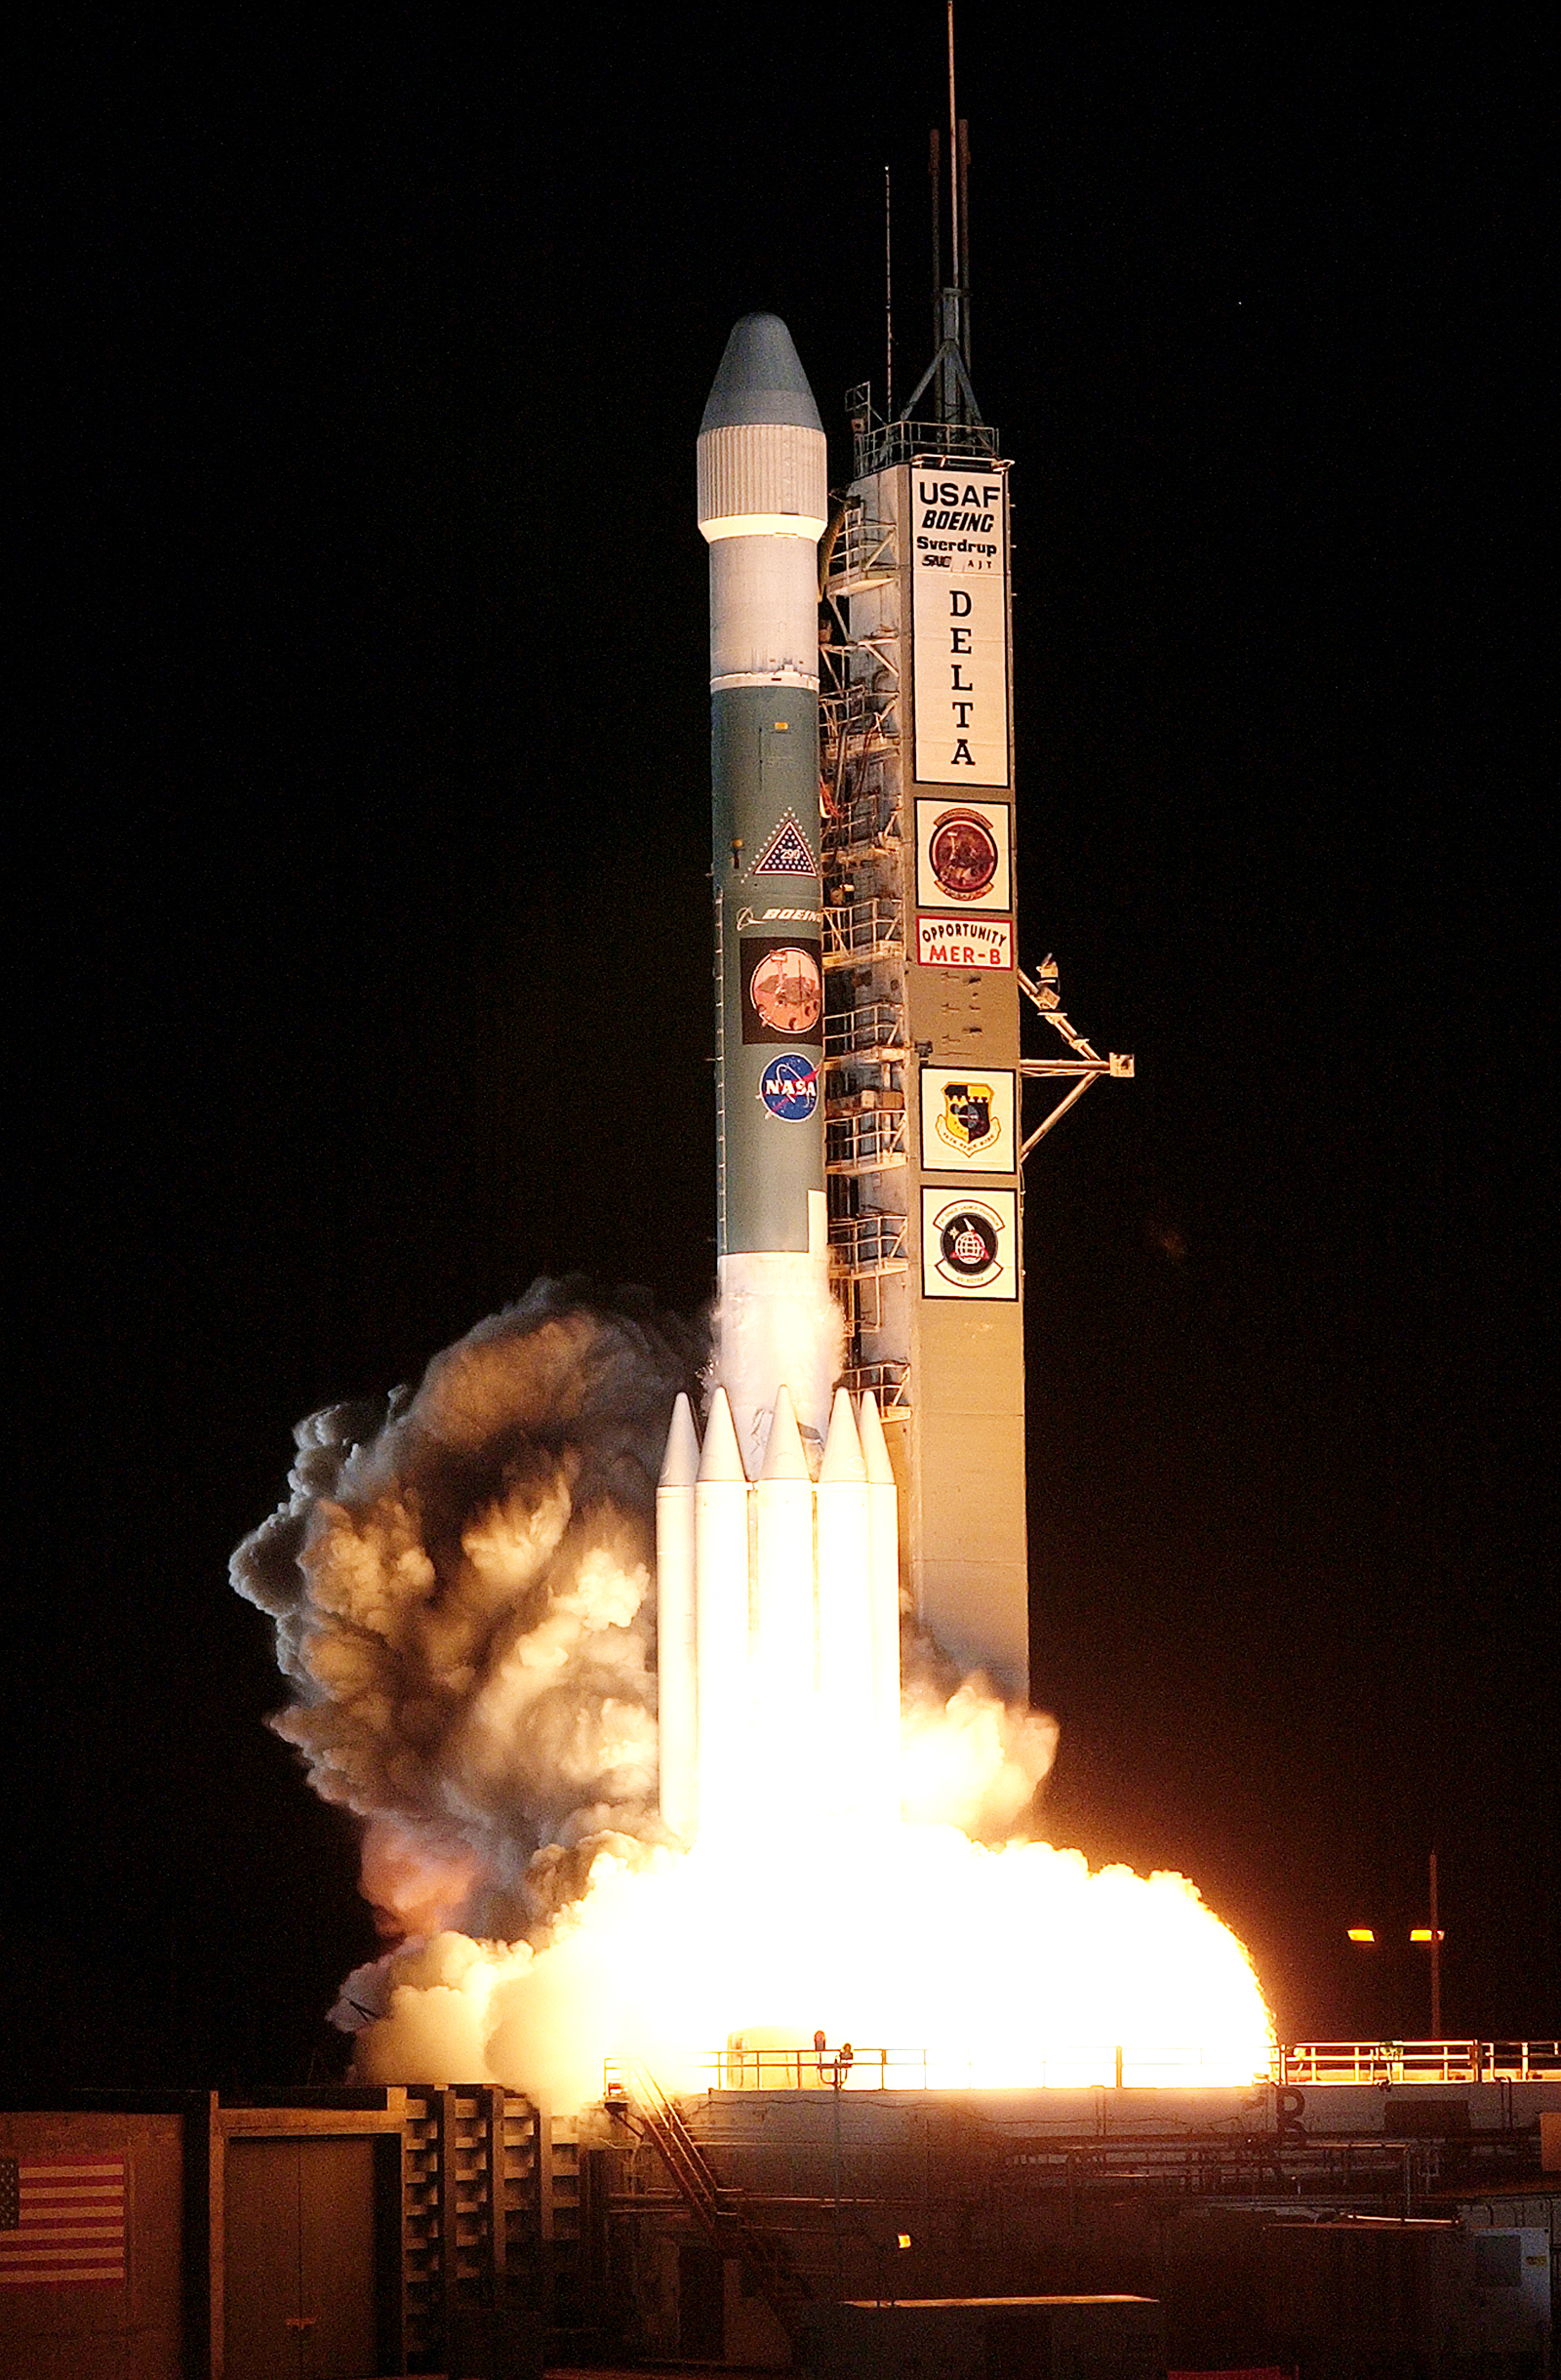 The second Mars Exploration Rover, Opportunity, was the first NASA mission lifted on what is referred to as a Delta II "heavy" rocket.